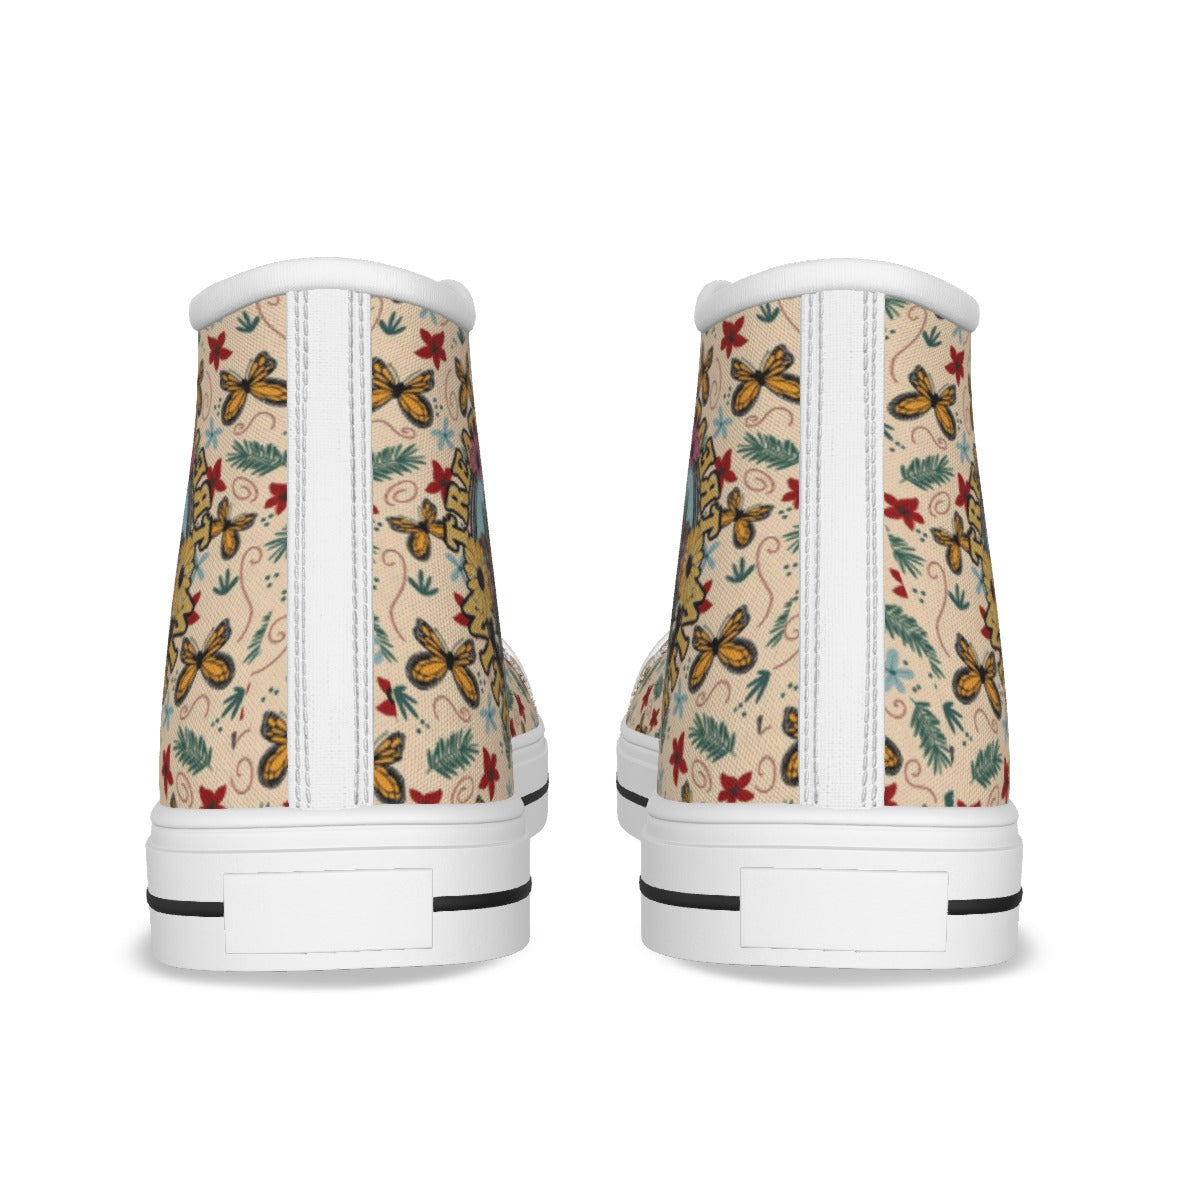 EShoes Personalized Women's Canvas Shoes, Treat Yourself With Kindness, Custom Name Shoes.